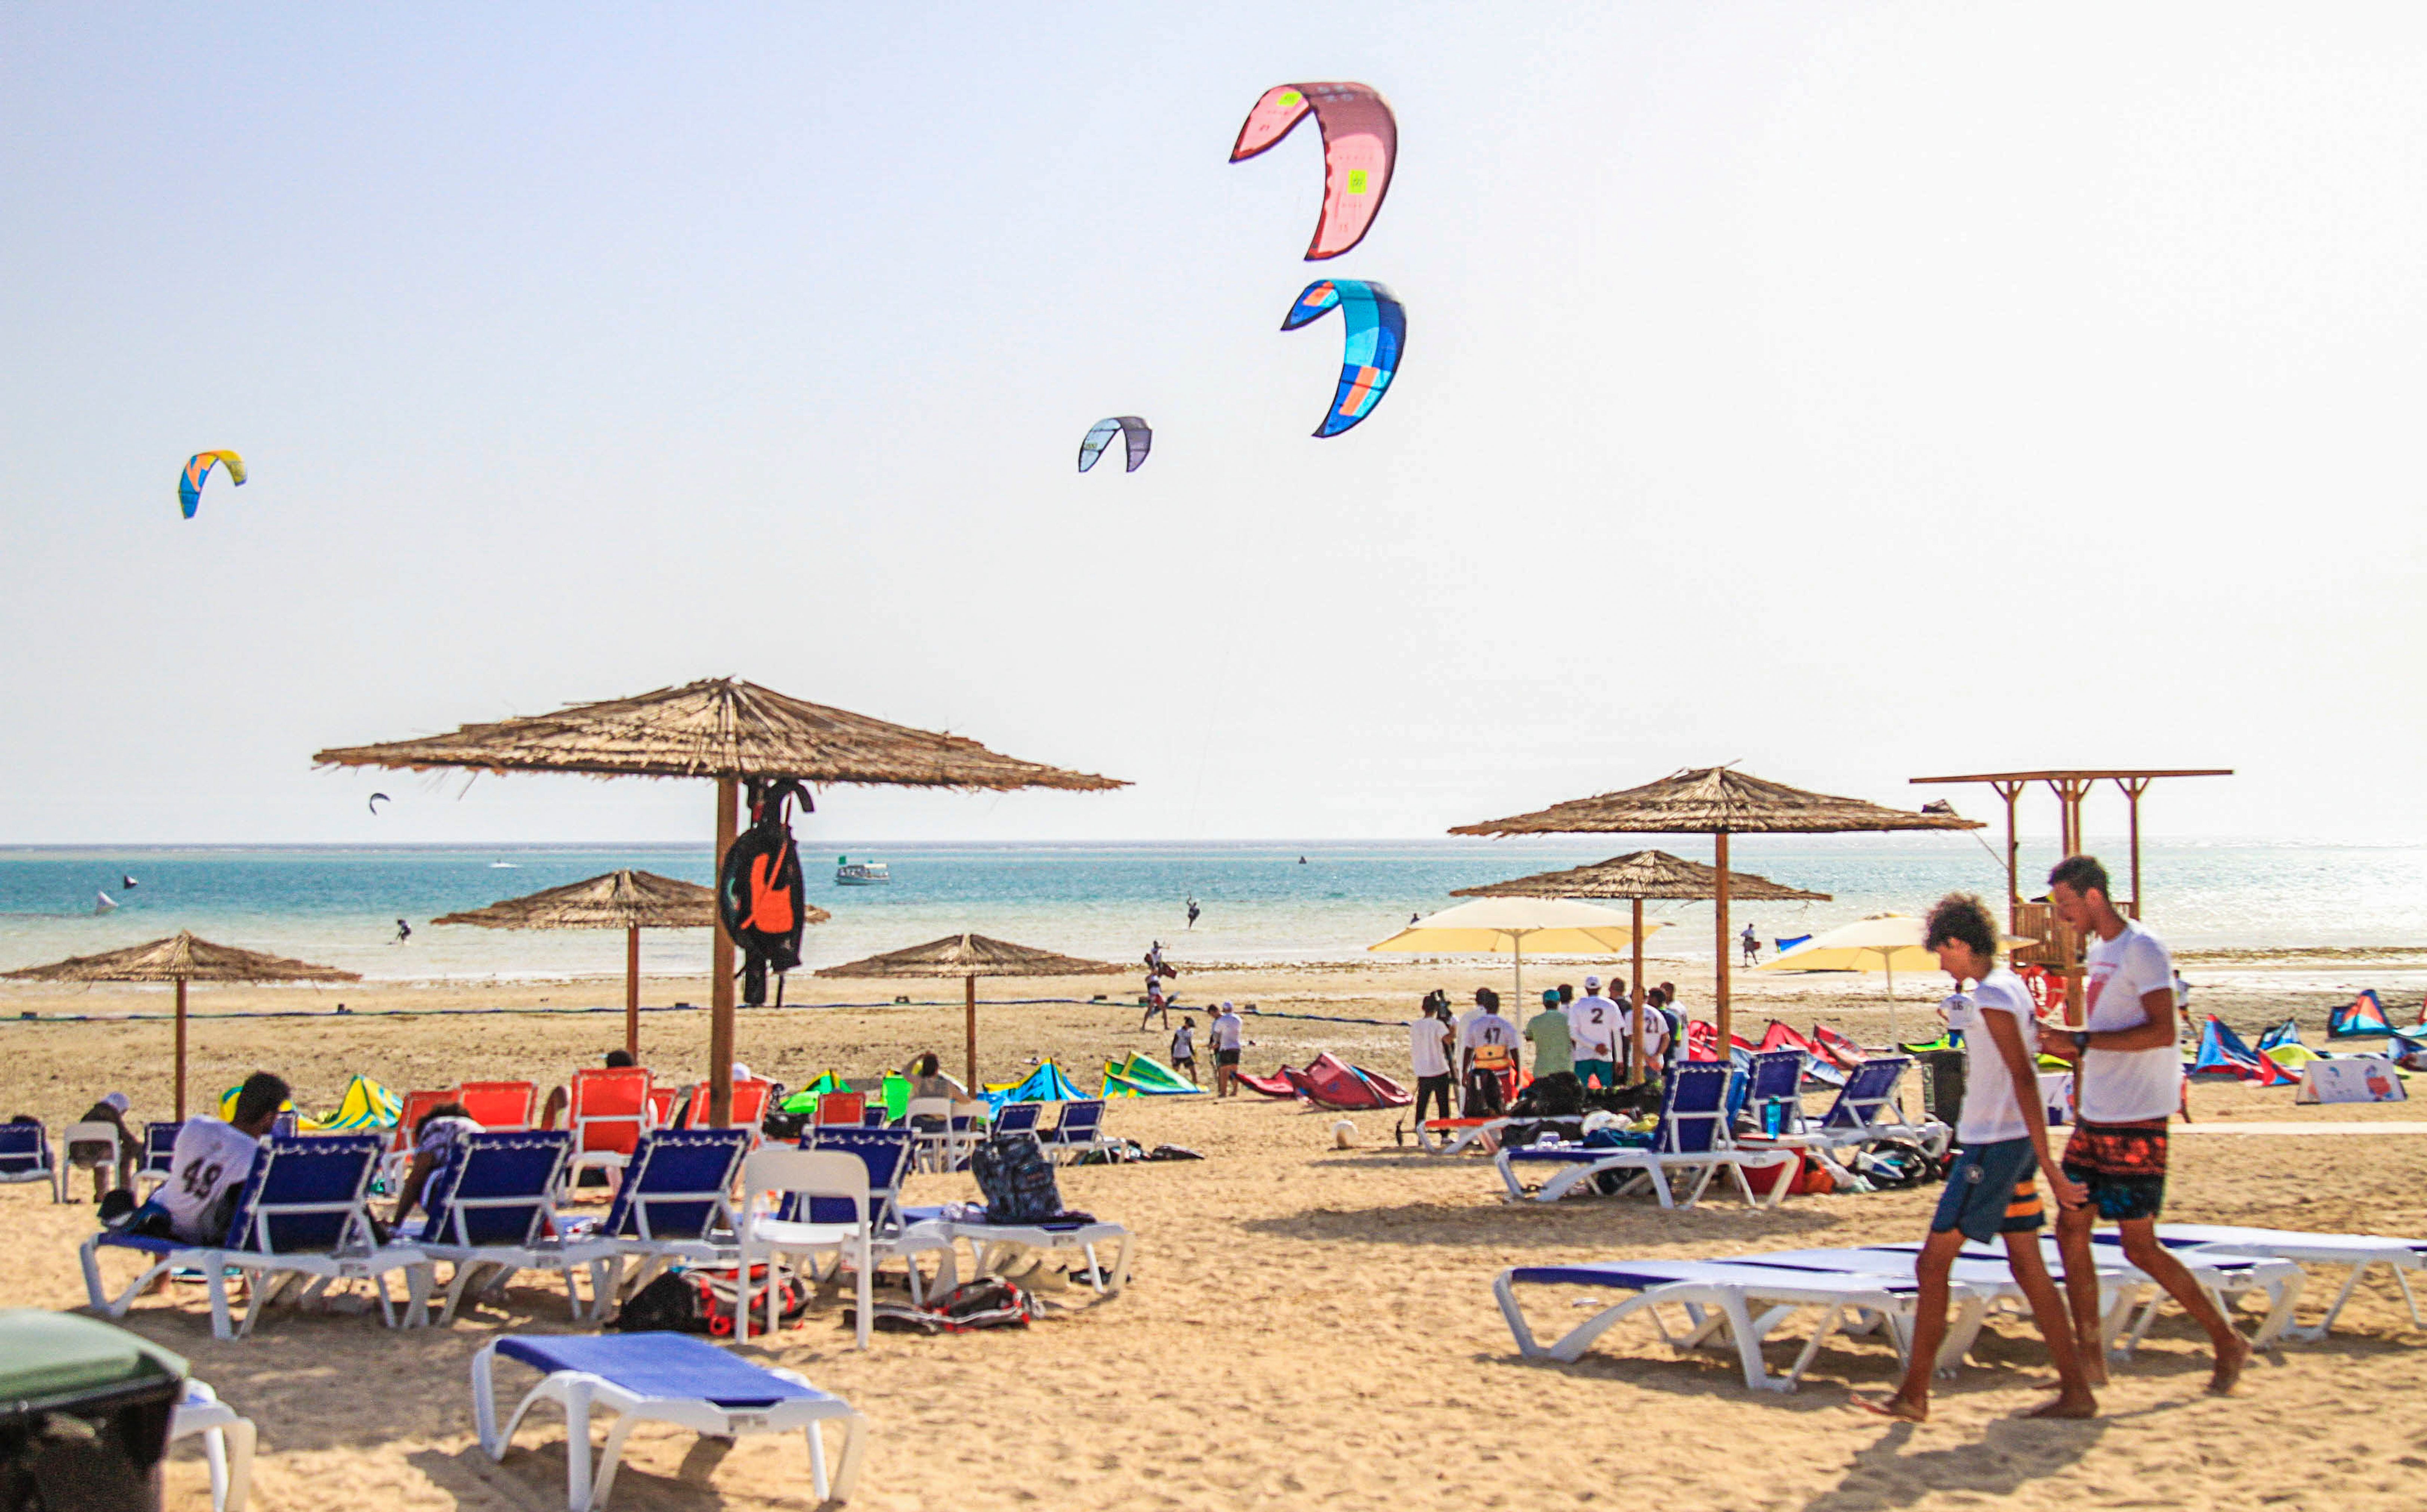 For watersports, head to Yam Beach